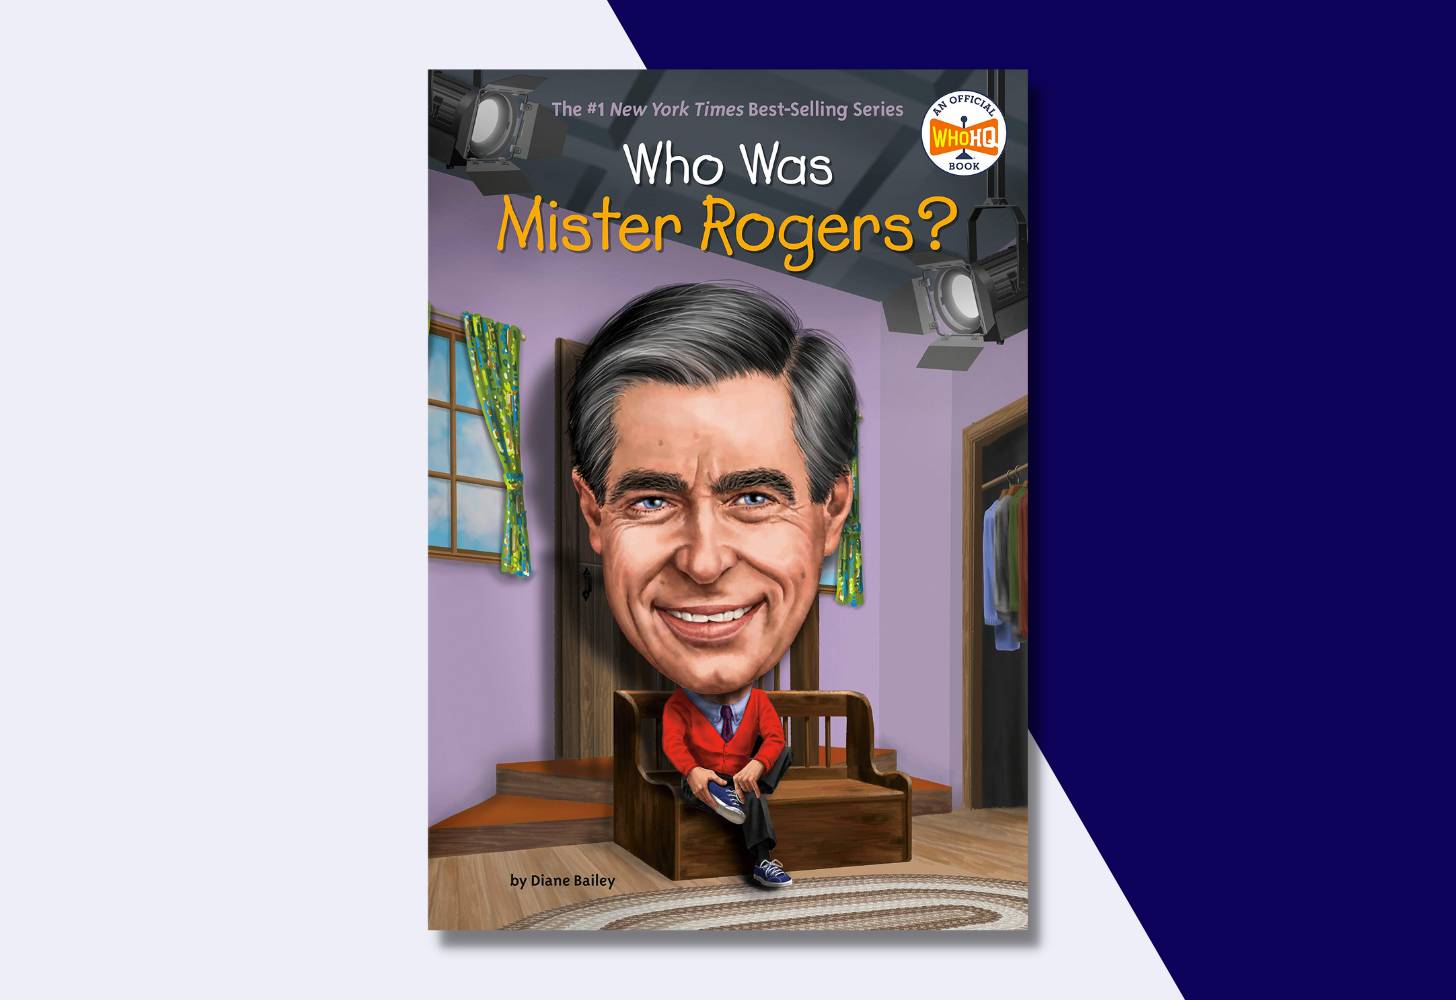 “Who Was Mister Rogers?” by Diane Bailey, illustrated by Dede Putra 